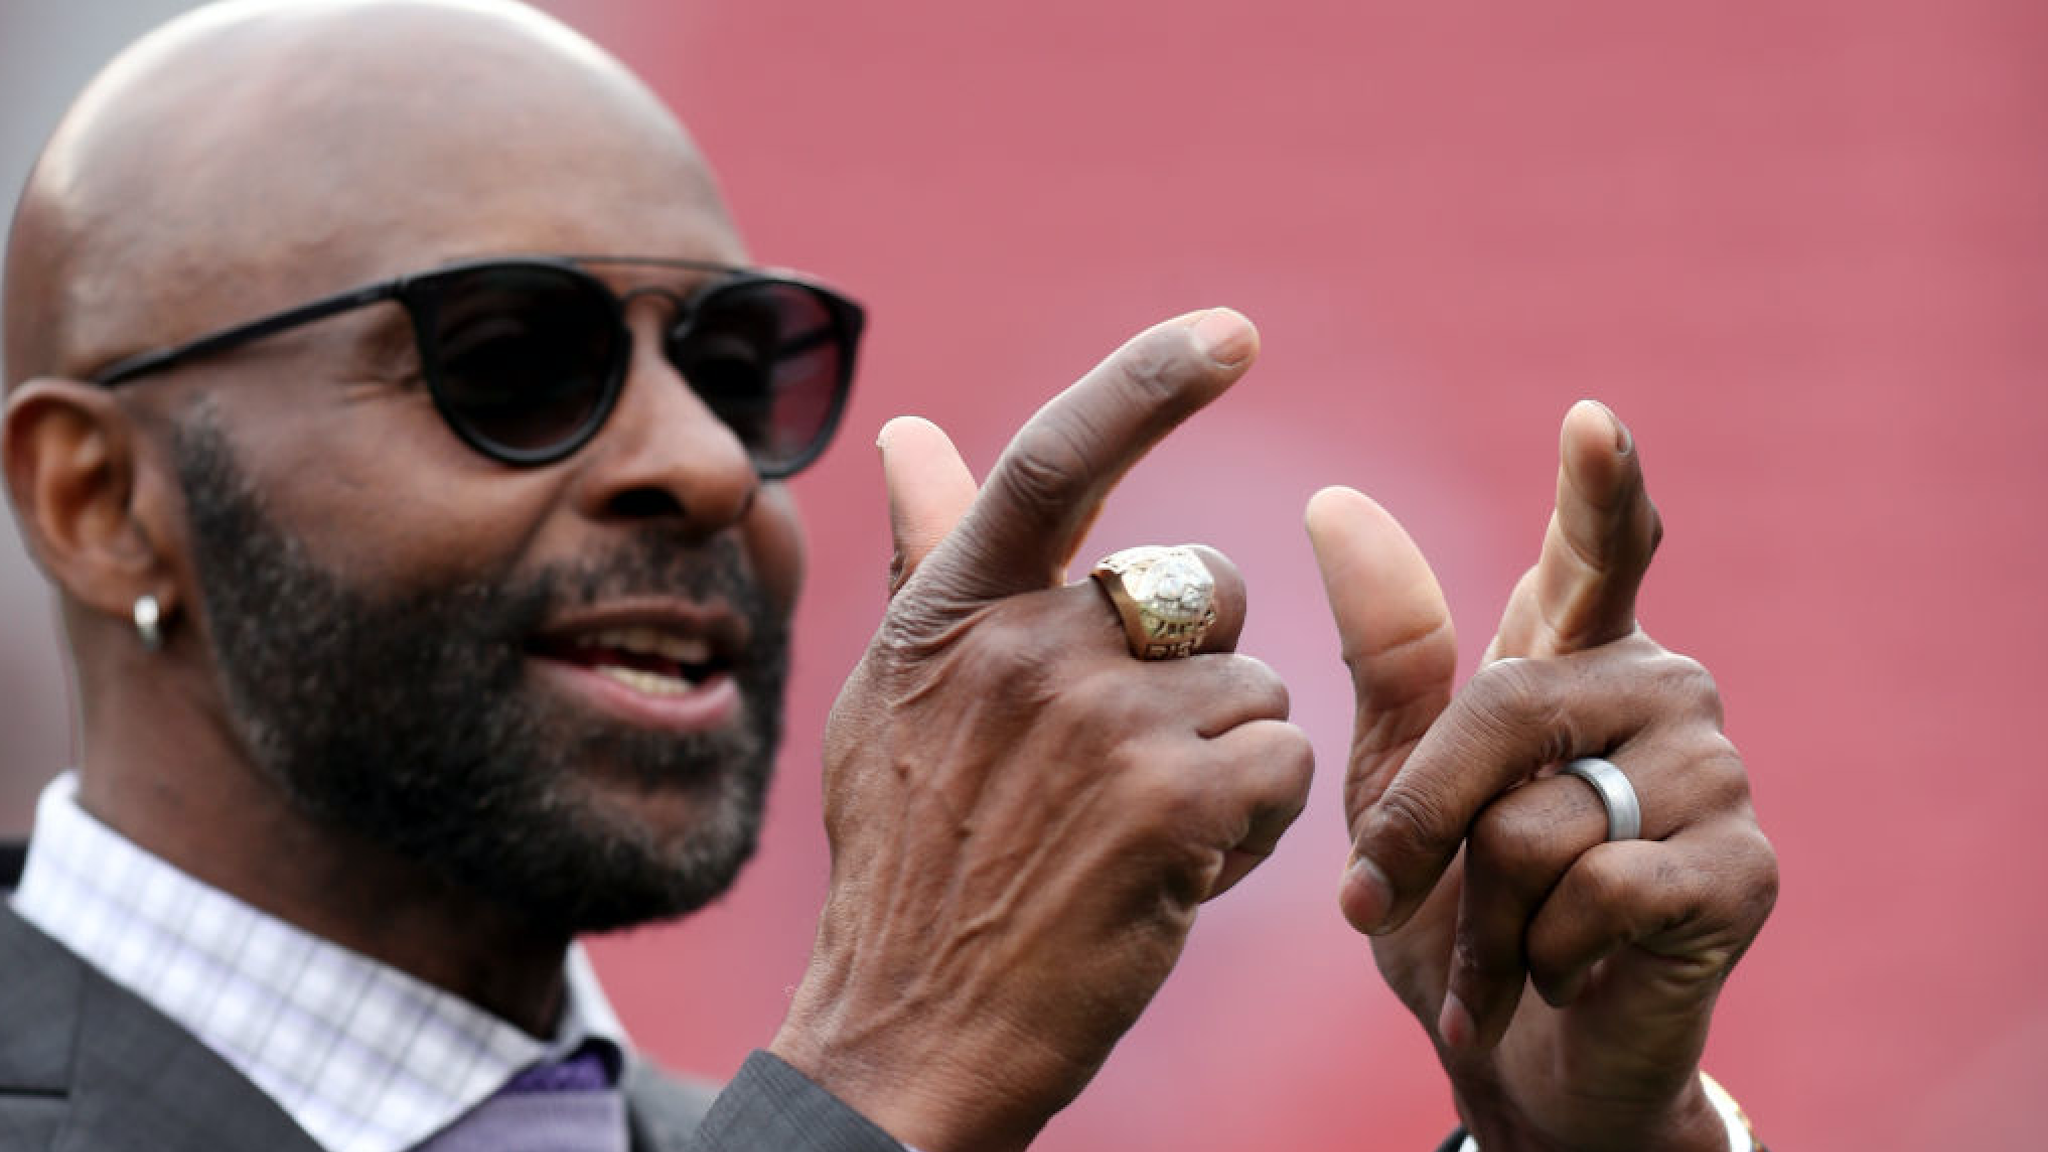 Former San Francisco 49ers wide receiver Jerry Rice -with one of this his Super Bowl rings- gestures before the San Francisco 49ers take on Green Bay Packers in their NFC Championship game at Levi's Stadium in Santa Clara, Calif., on Sunday, Jan. 19, 2020.